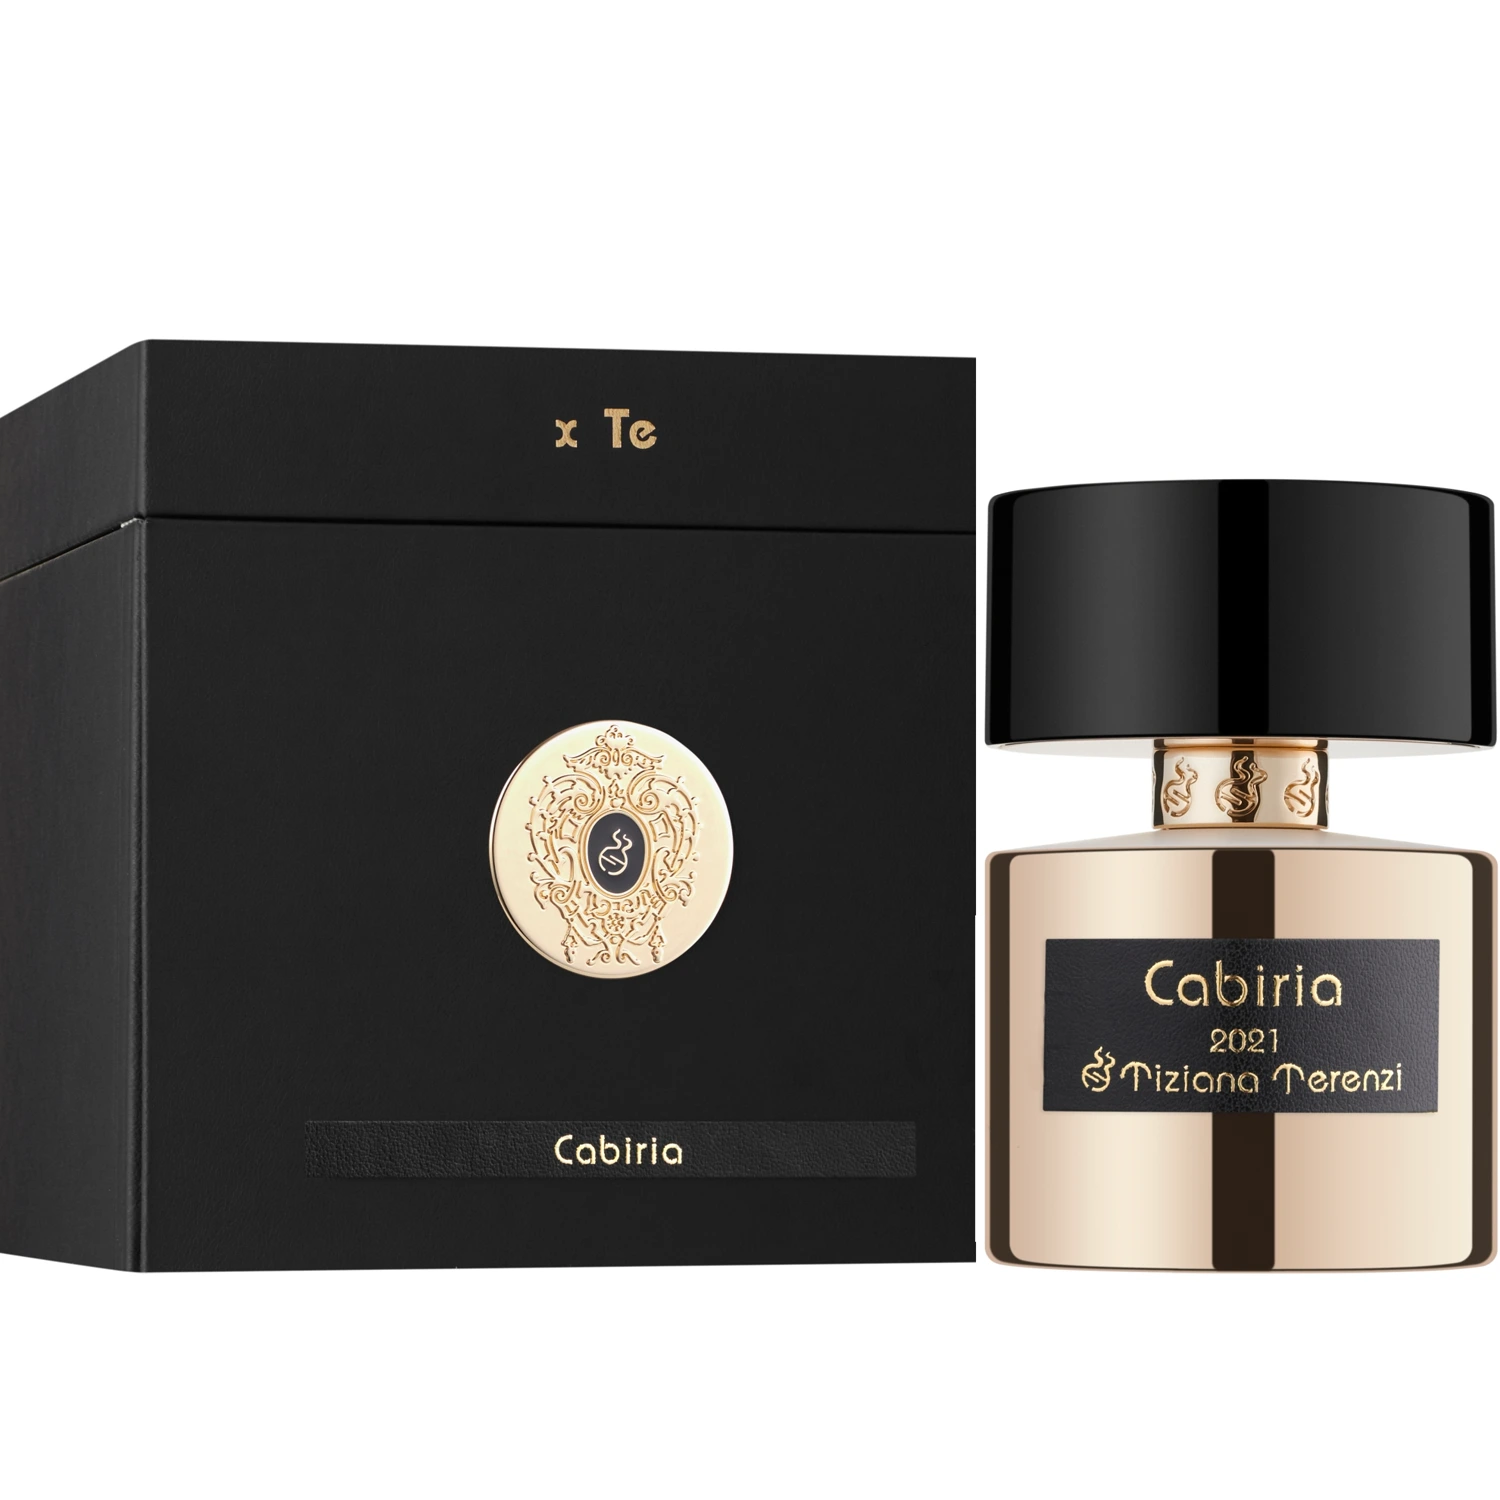 <p data-mce-fragment="1">Tiziana Terenzi’s Cabiria 3.4 oz Extrait de Parfum Unisex is a tribute to the eponymous heroine from the 1957 film and is inspired by her story of strength, courage and hope. Blended with a selection of precious ingredients, this perfume helps to capture Cabiria’s angelic spirit and her unwavering optimism. Wear it to commemorate her message of resilience and joy.</p>